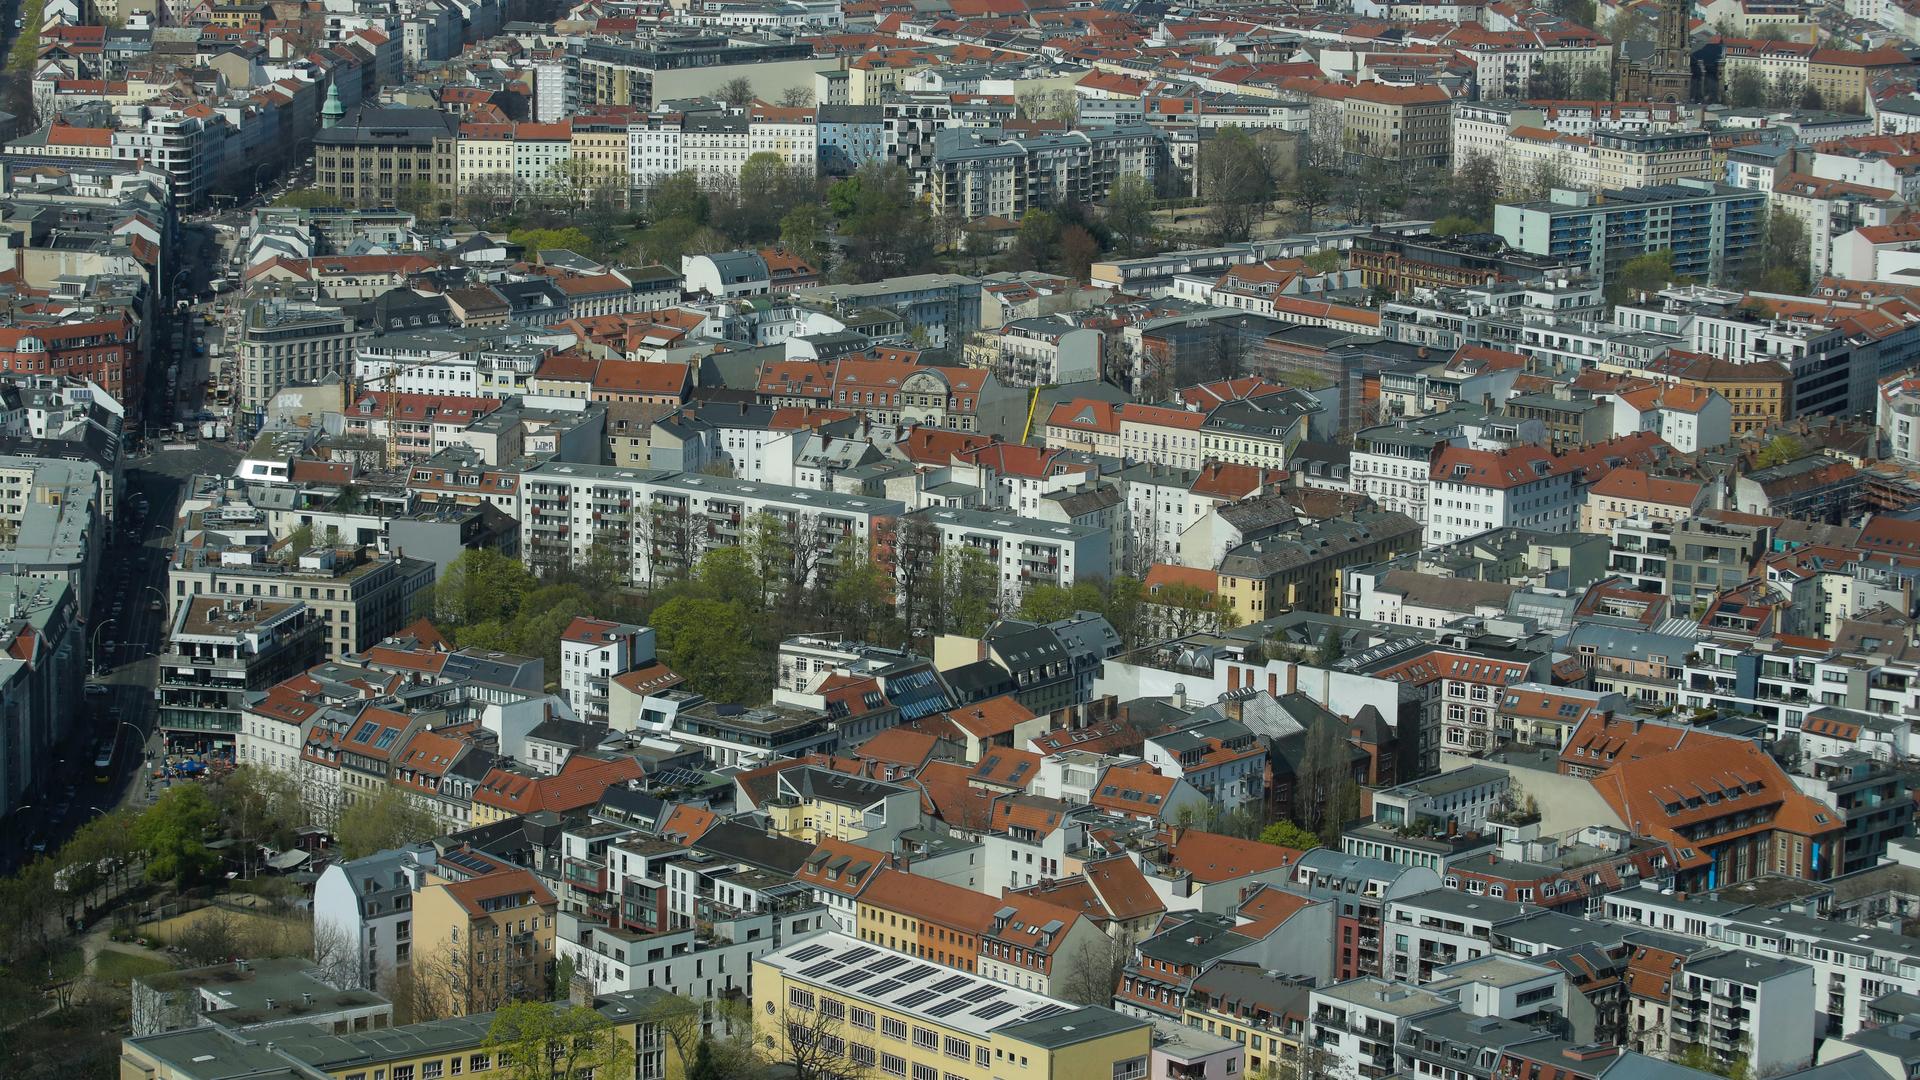 Apartment buildings in the Mitte borough of Berlin were photographed from the capital's television tower, April 4, 2019.